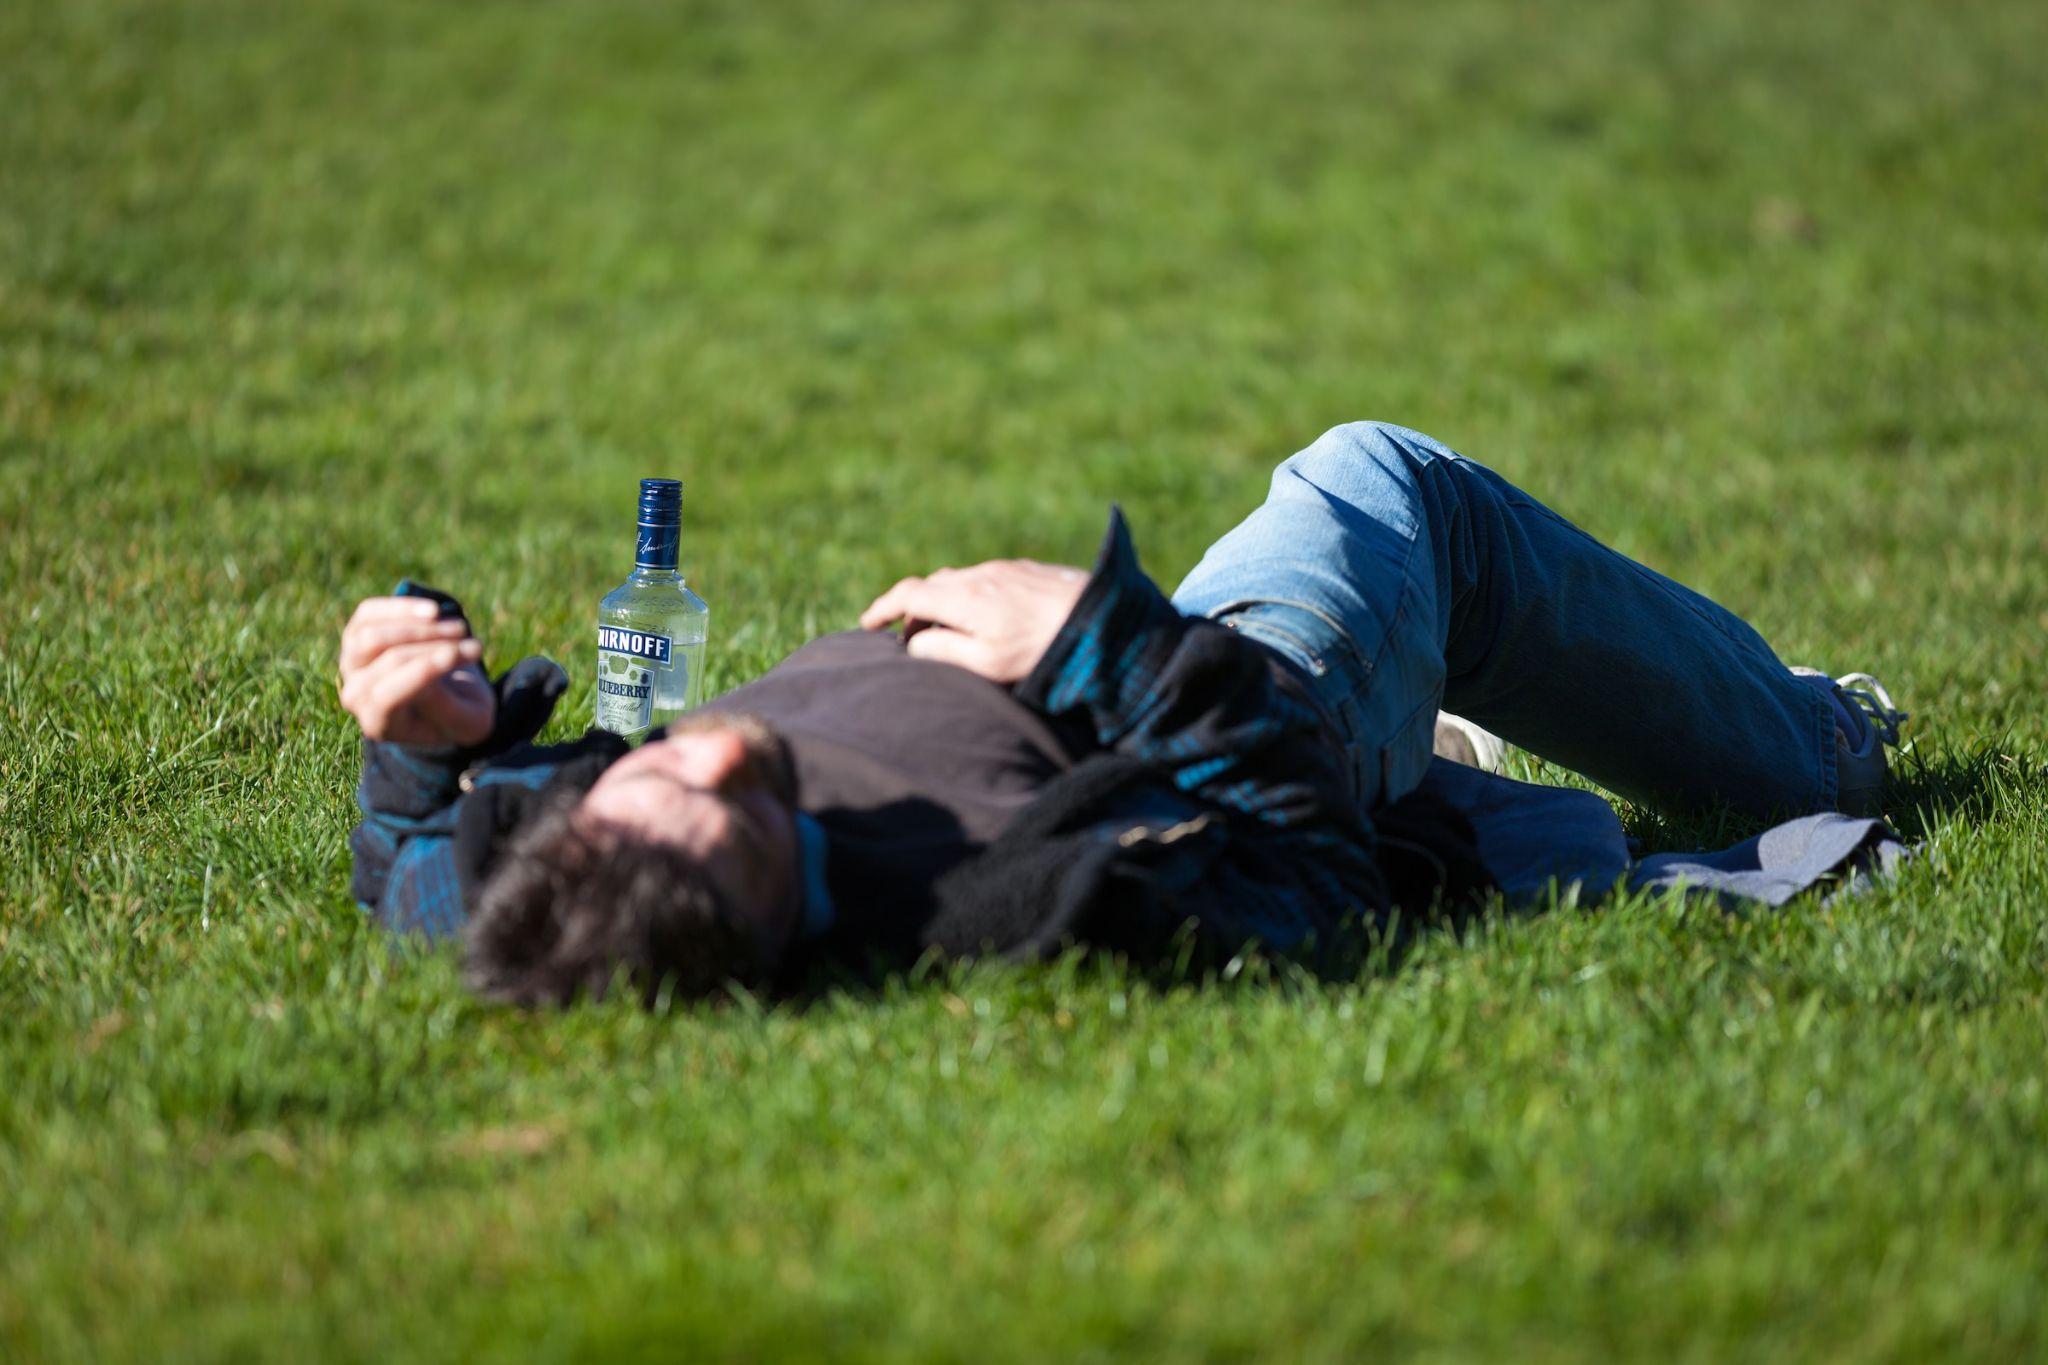 Drunk Man Laying On Grass With Bottle Of Alcohol